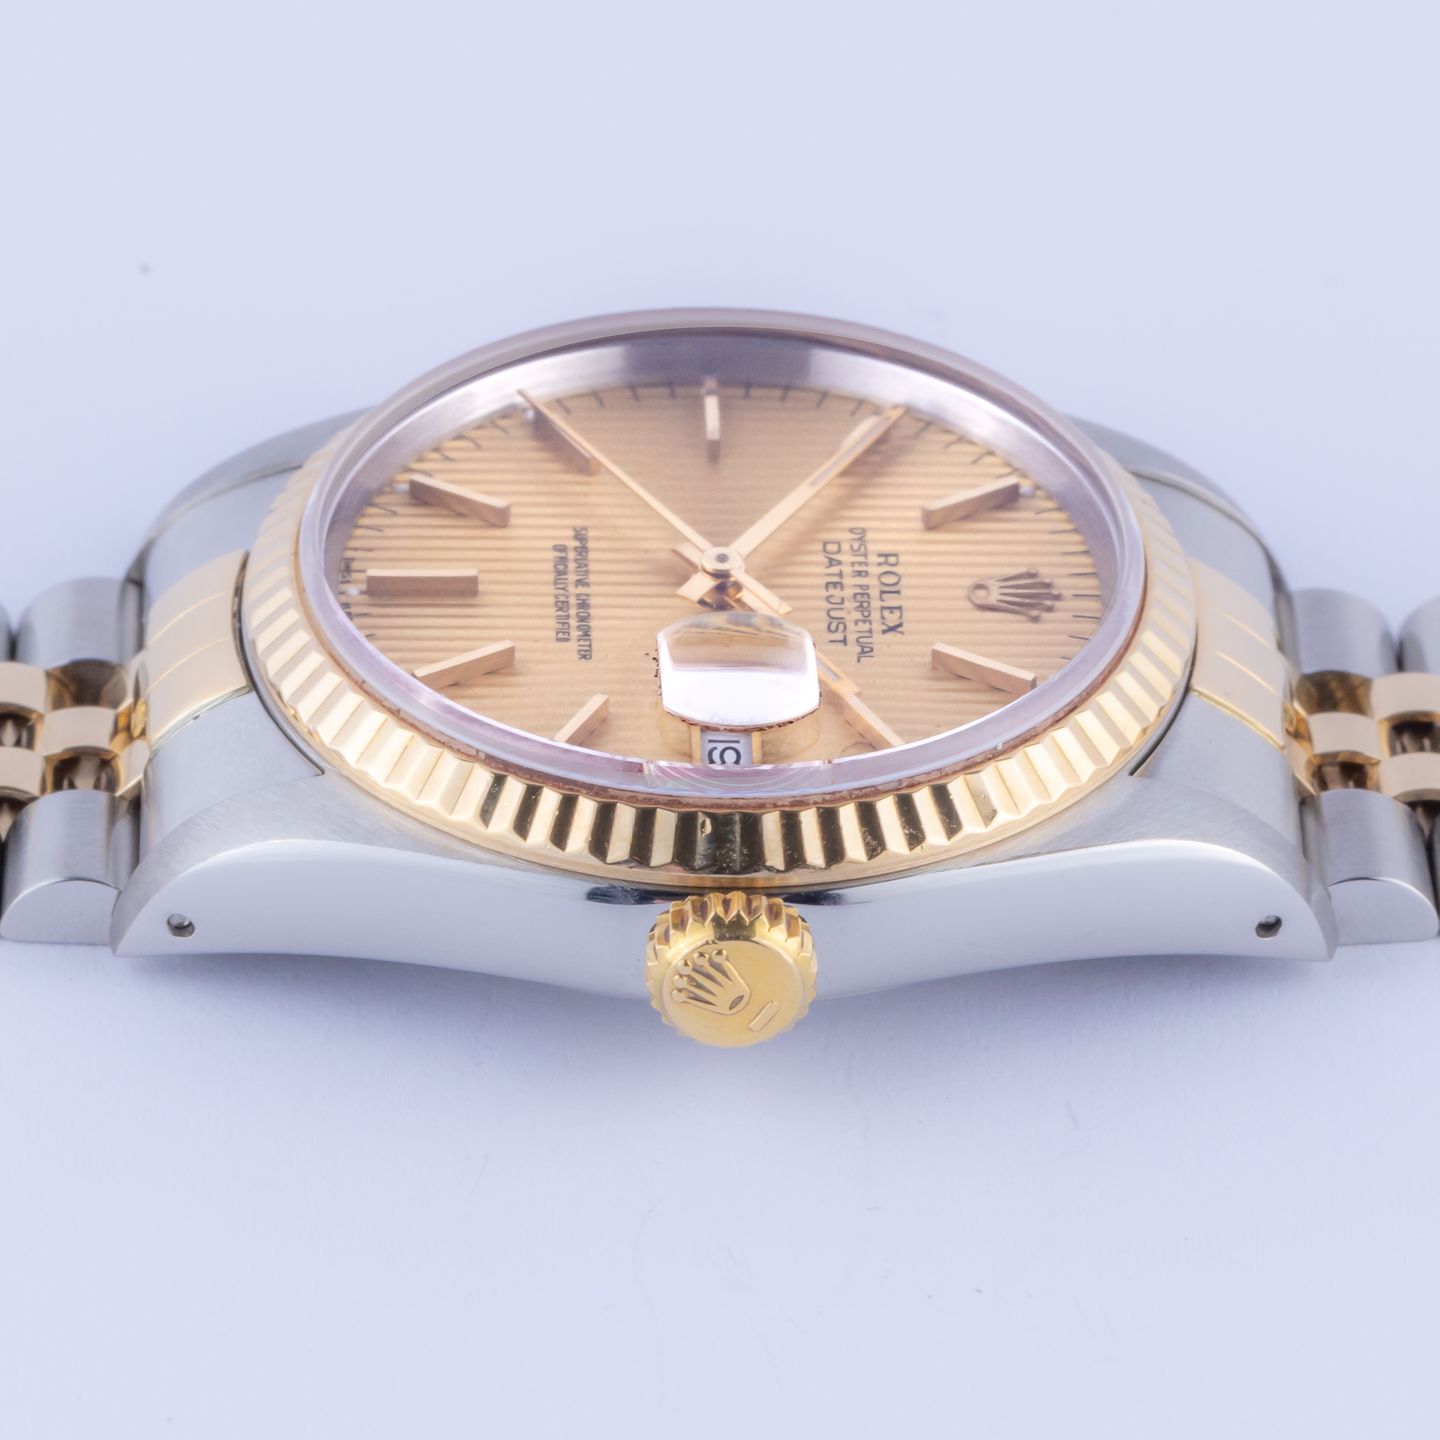 Rolex Datejust 36 16233 (1991) - Champagne dial 36 mm Gold/Steel case (5/8)